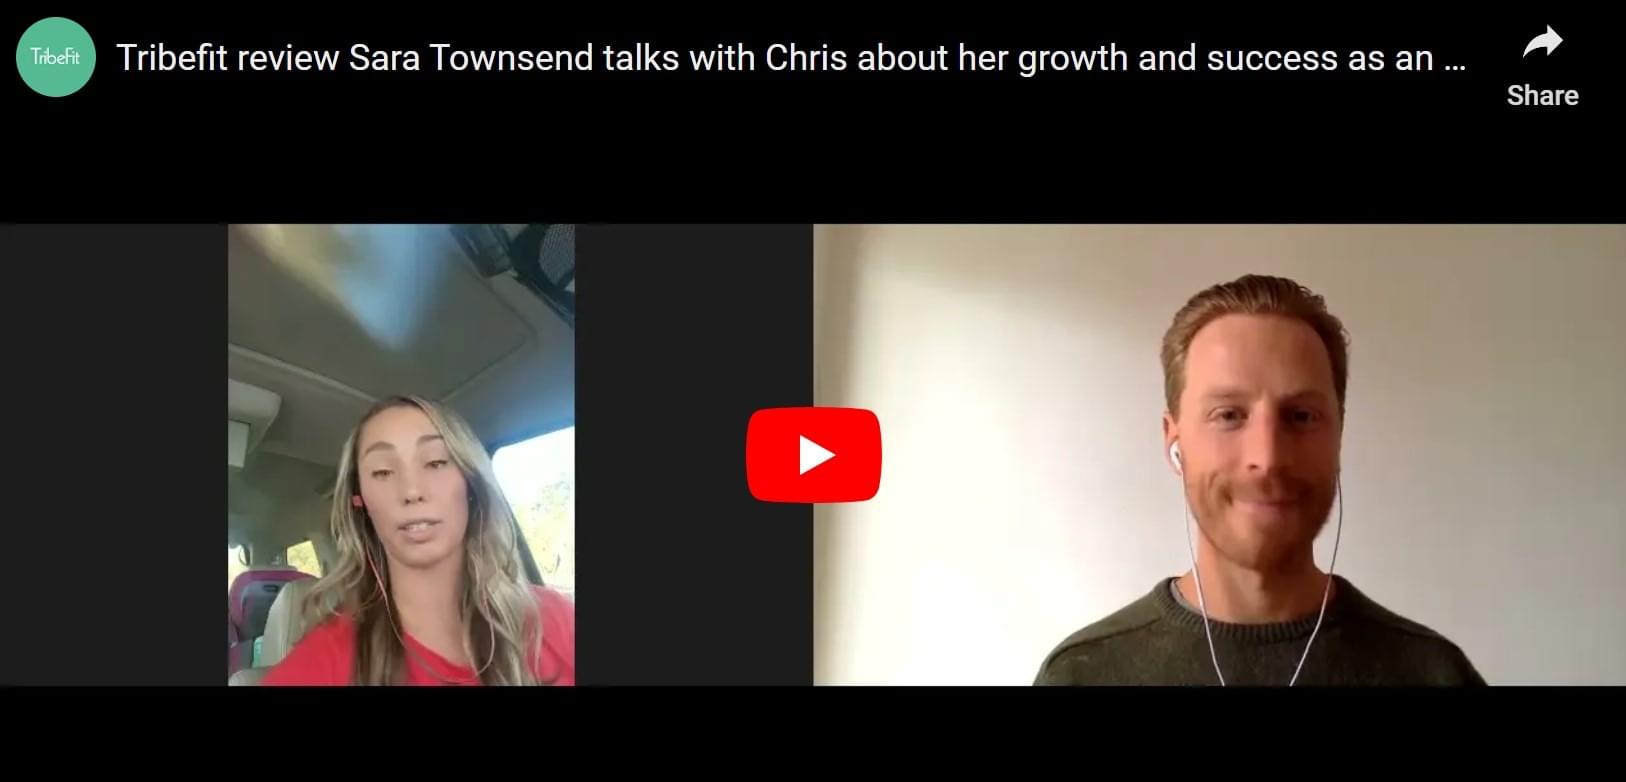 Sara Townsend talks with Chris about her growth and success 